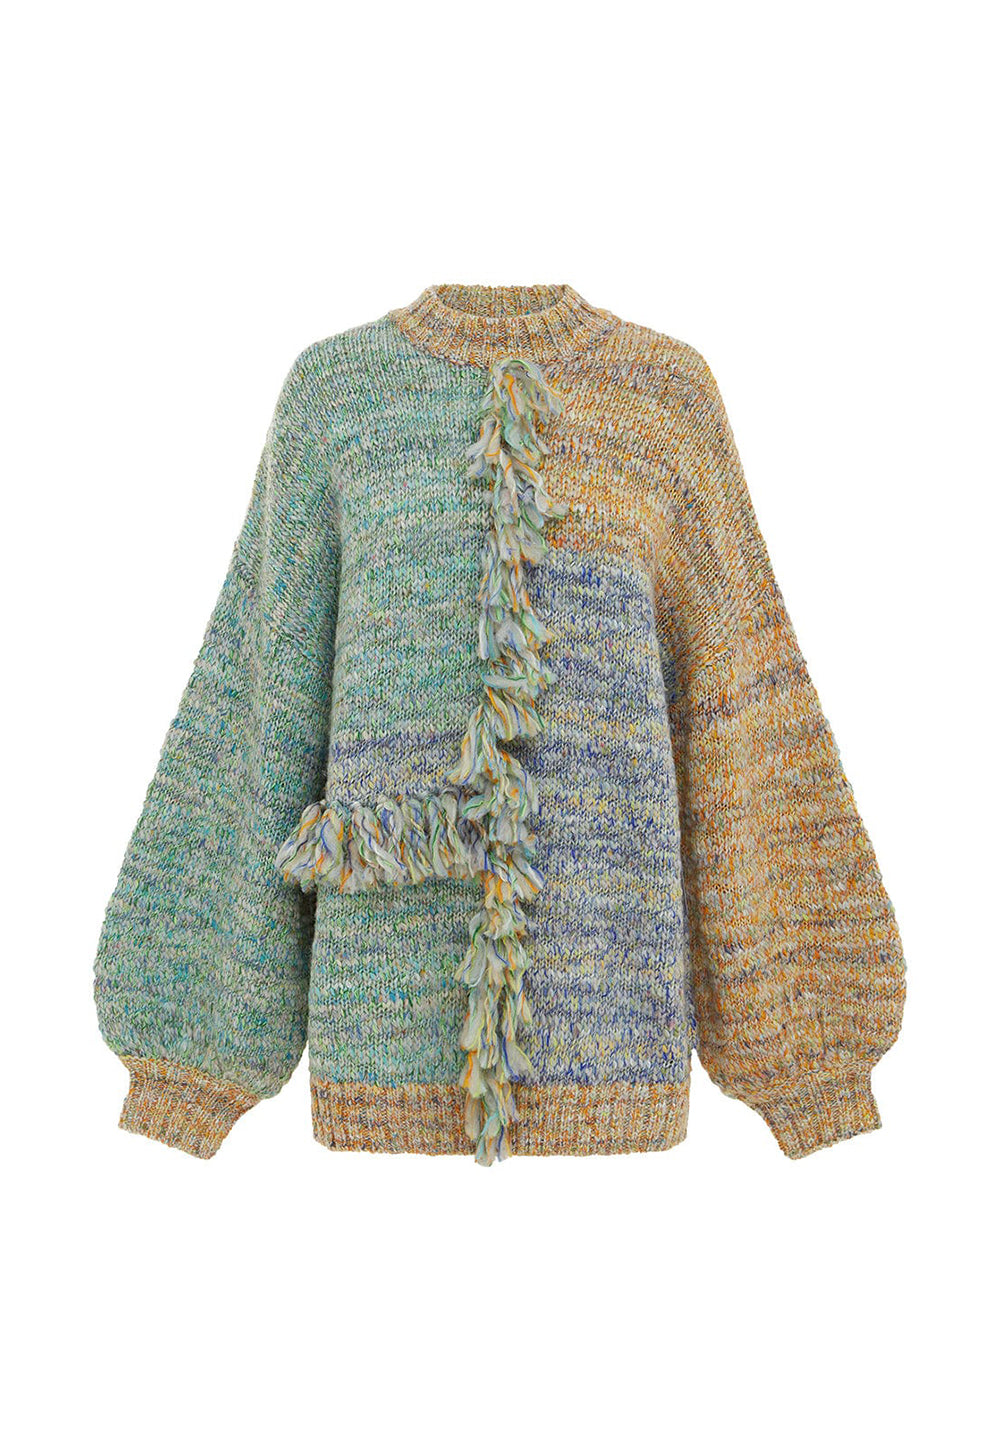 Razzle Sweater - Multi sold by Angel Divine